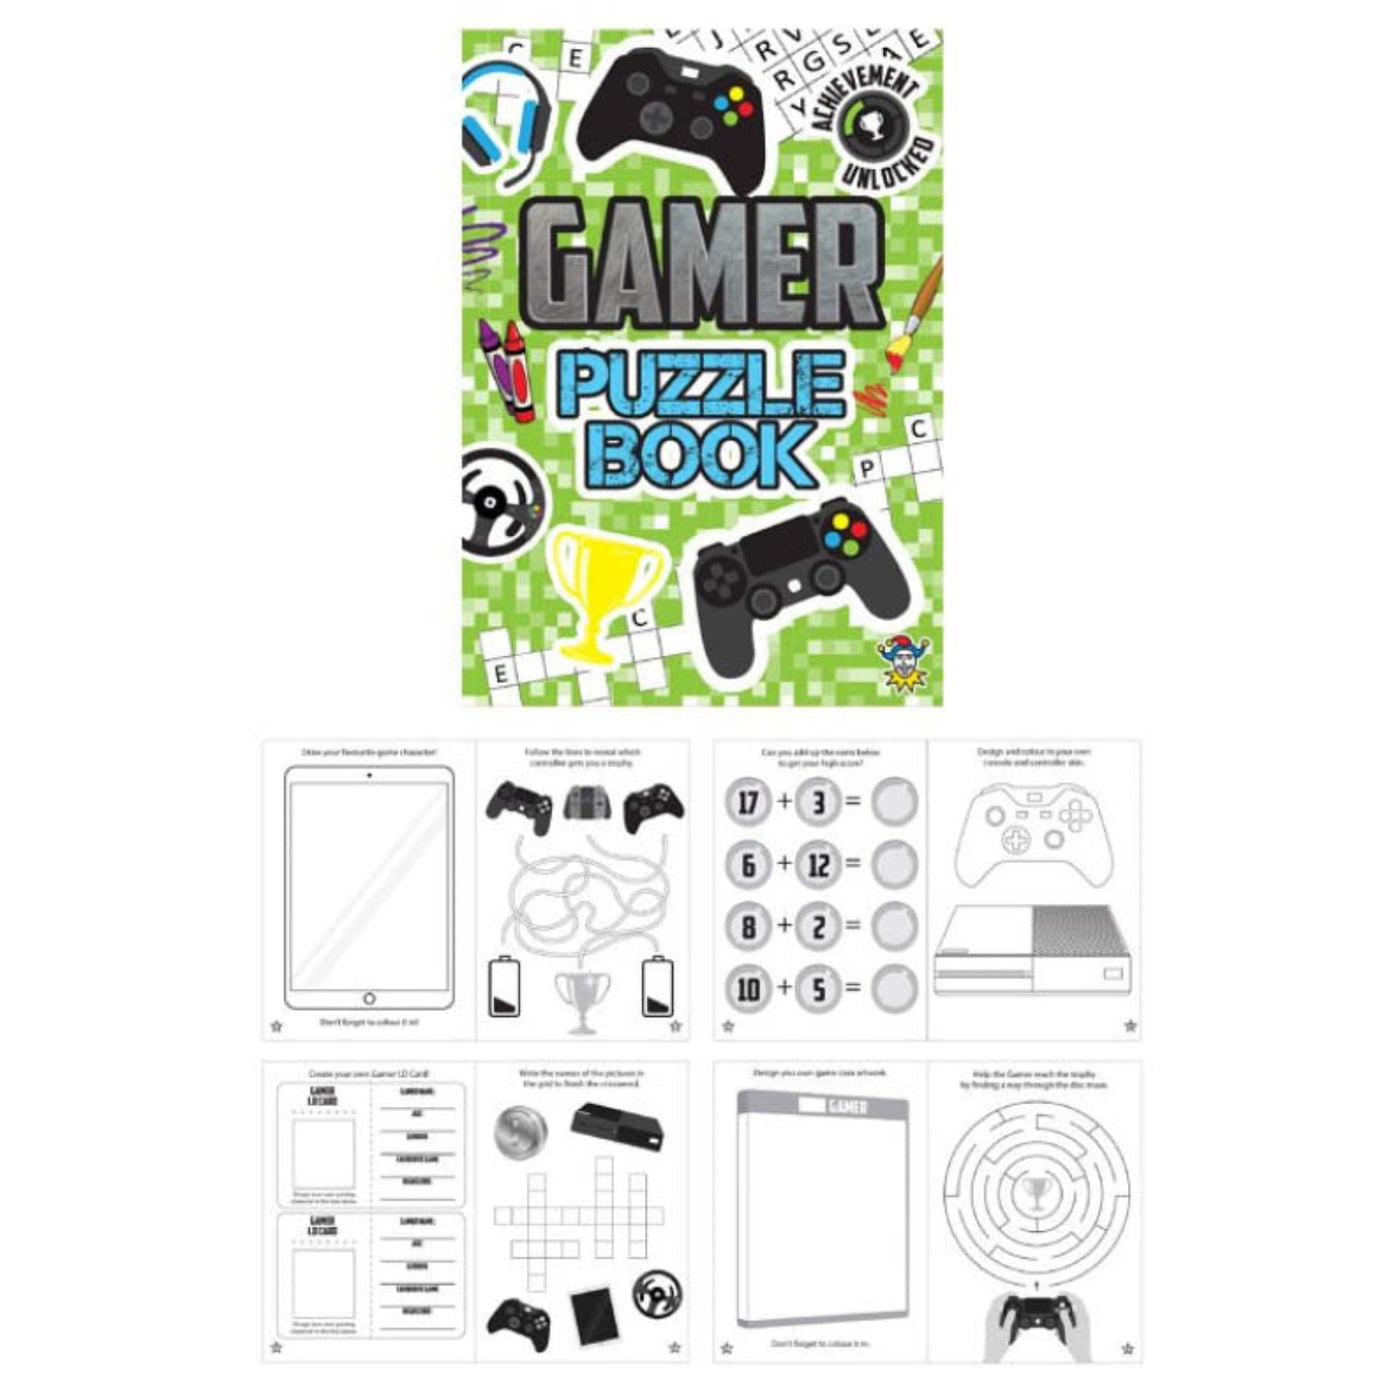 Children Pre Filled Robot Gamer Birthday Party Goody Bags With Toys And Sweets, Party Favours.